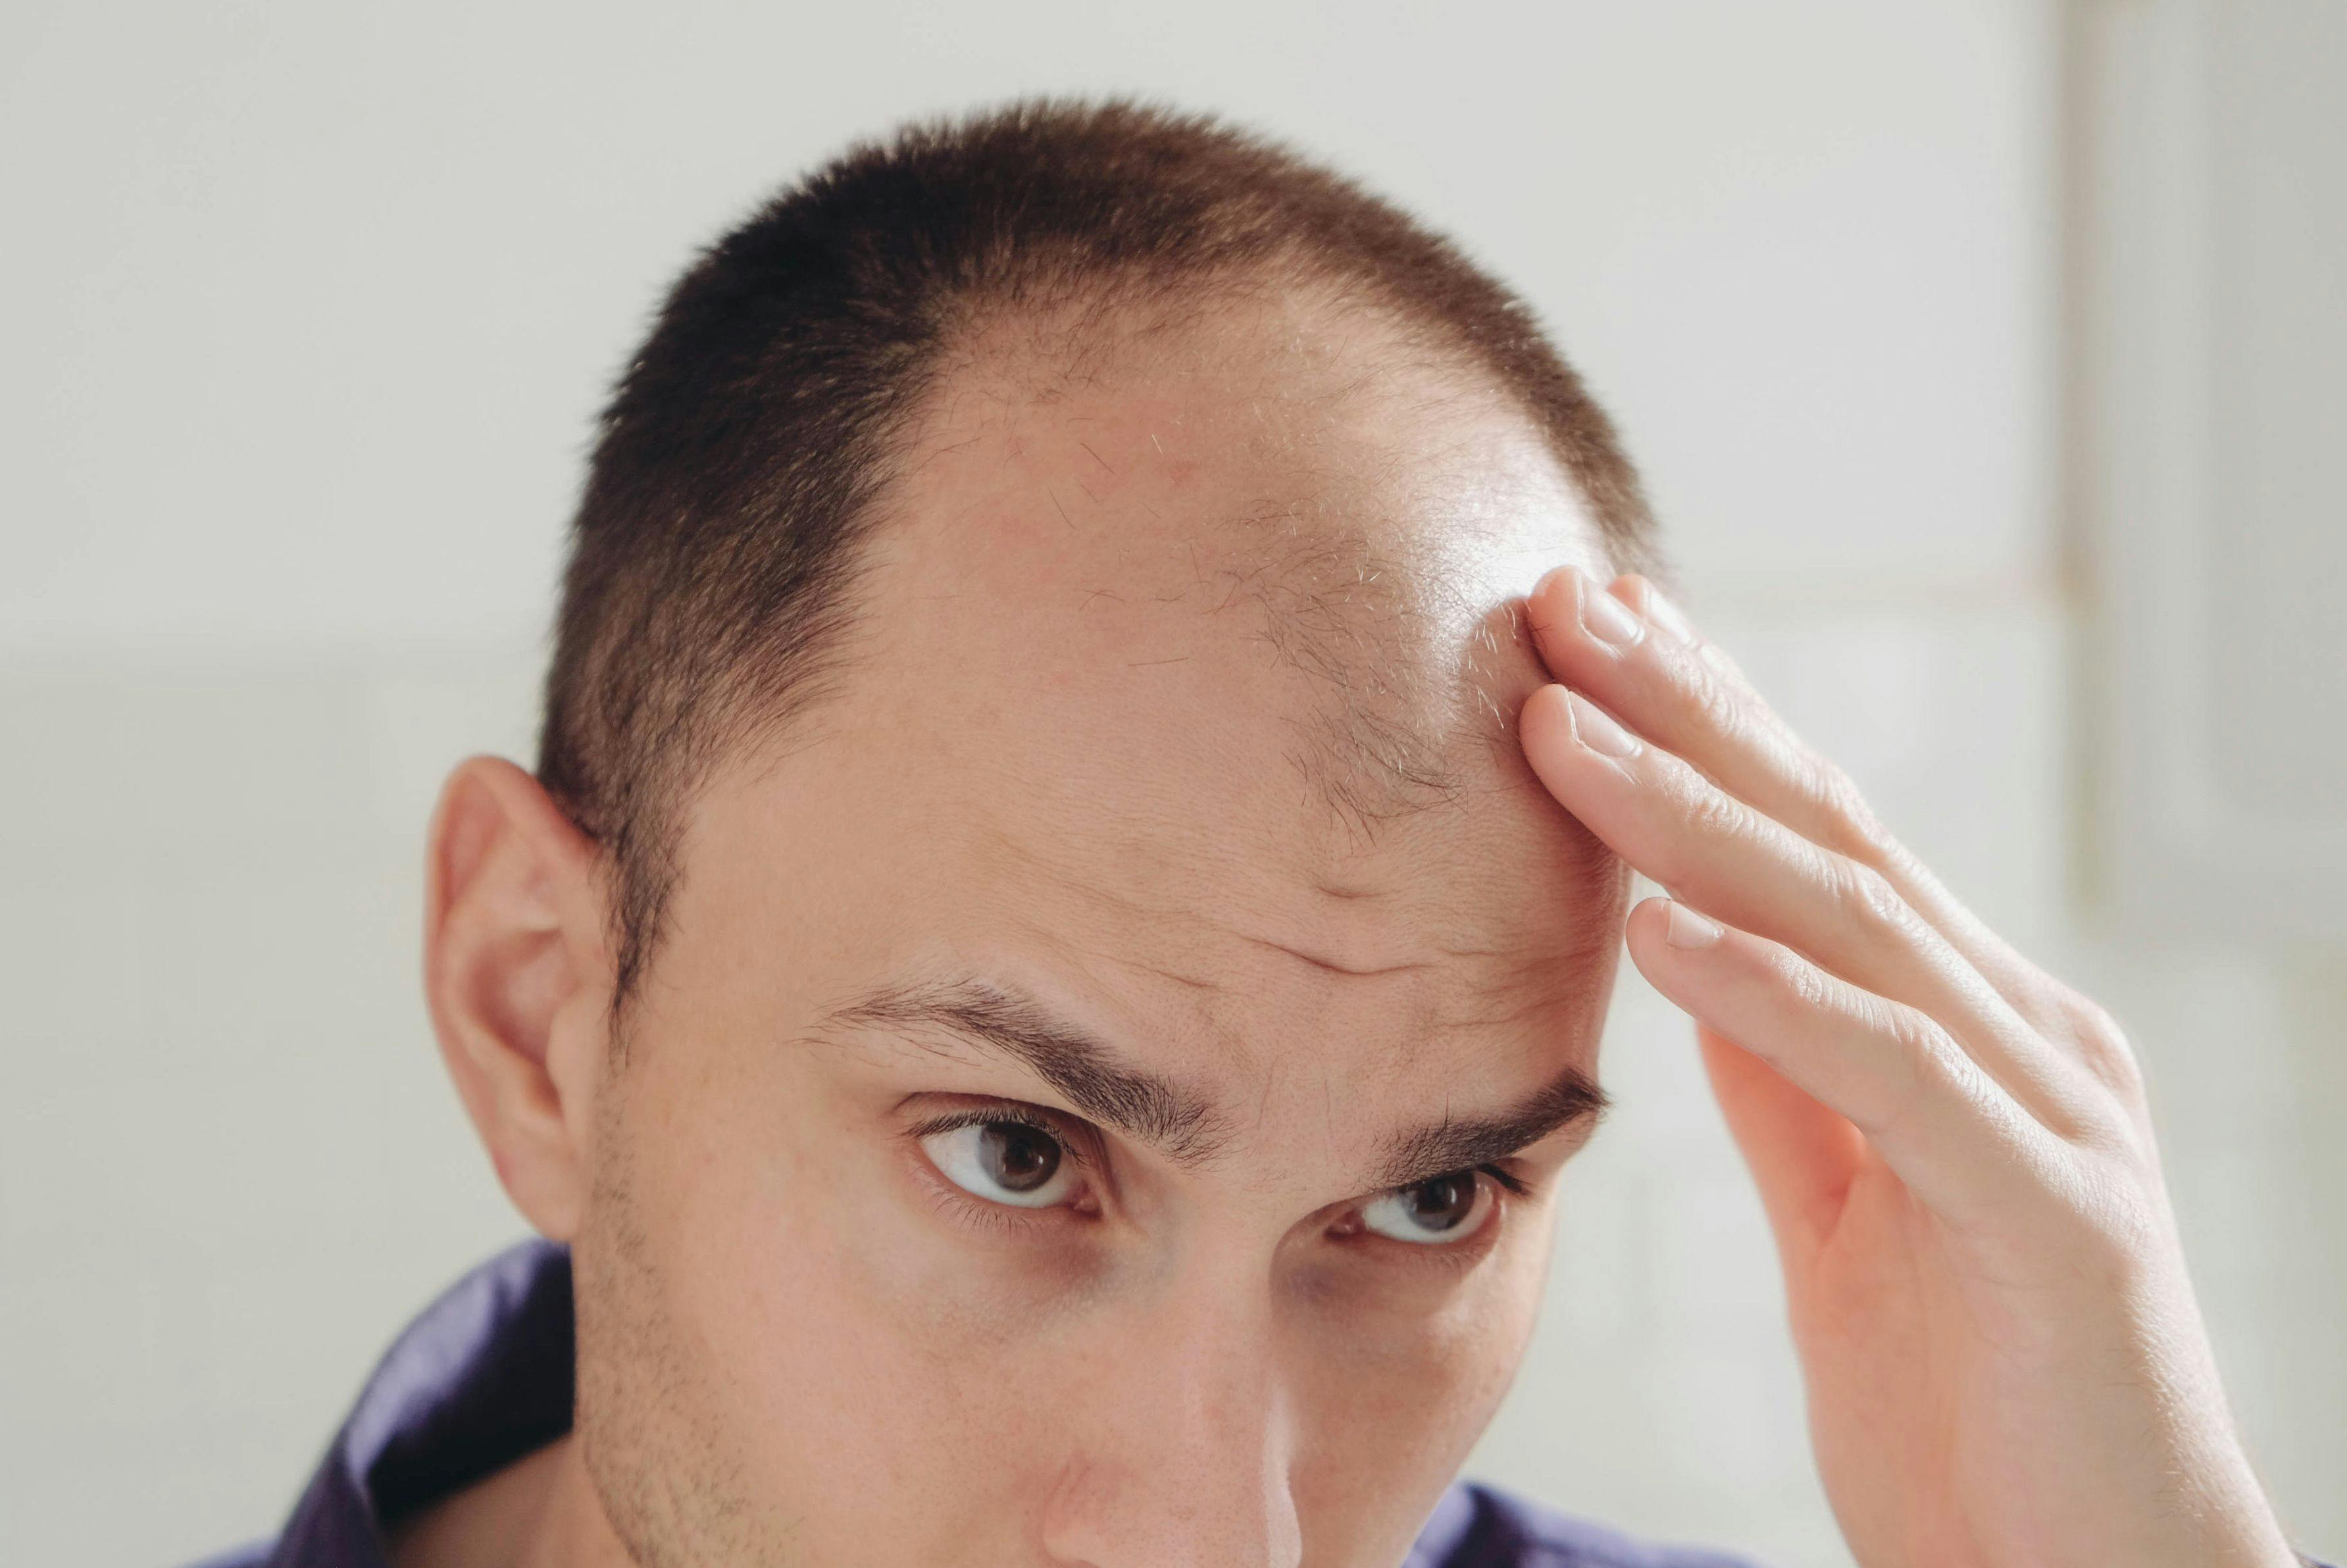 Man with pattern hair loss looking in mirror